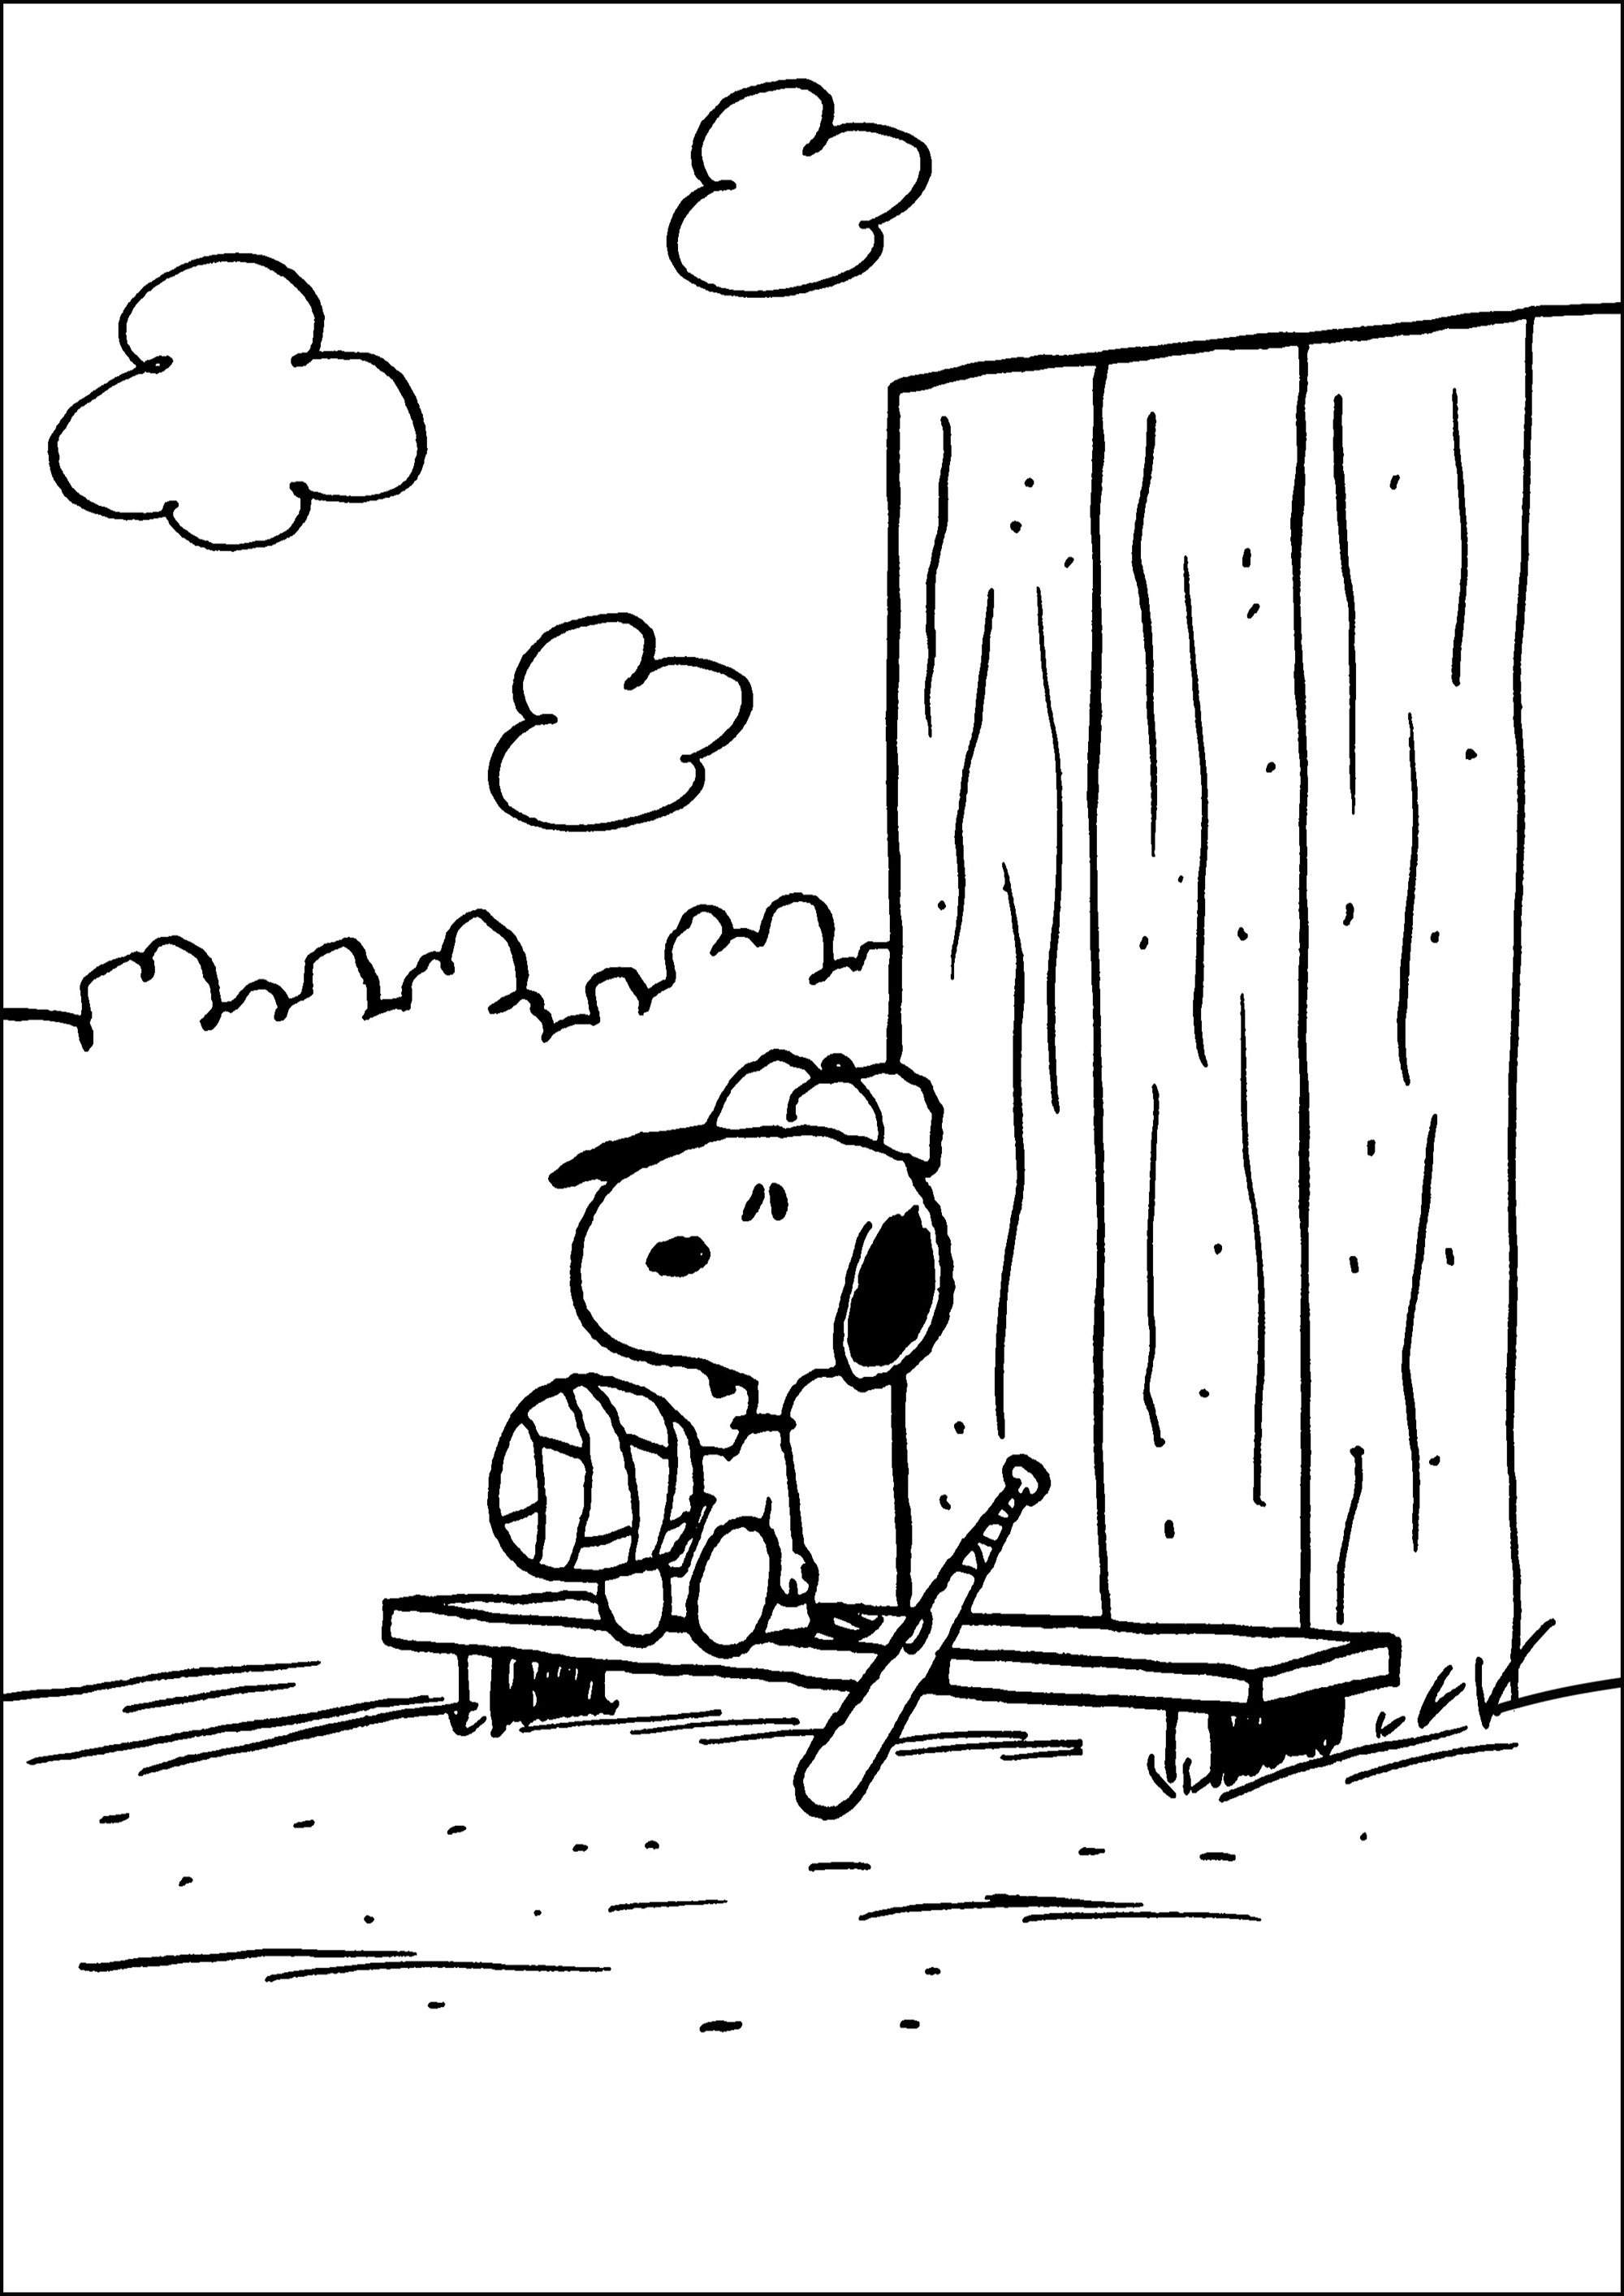 Snoopy ready to play a baseball game